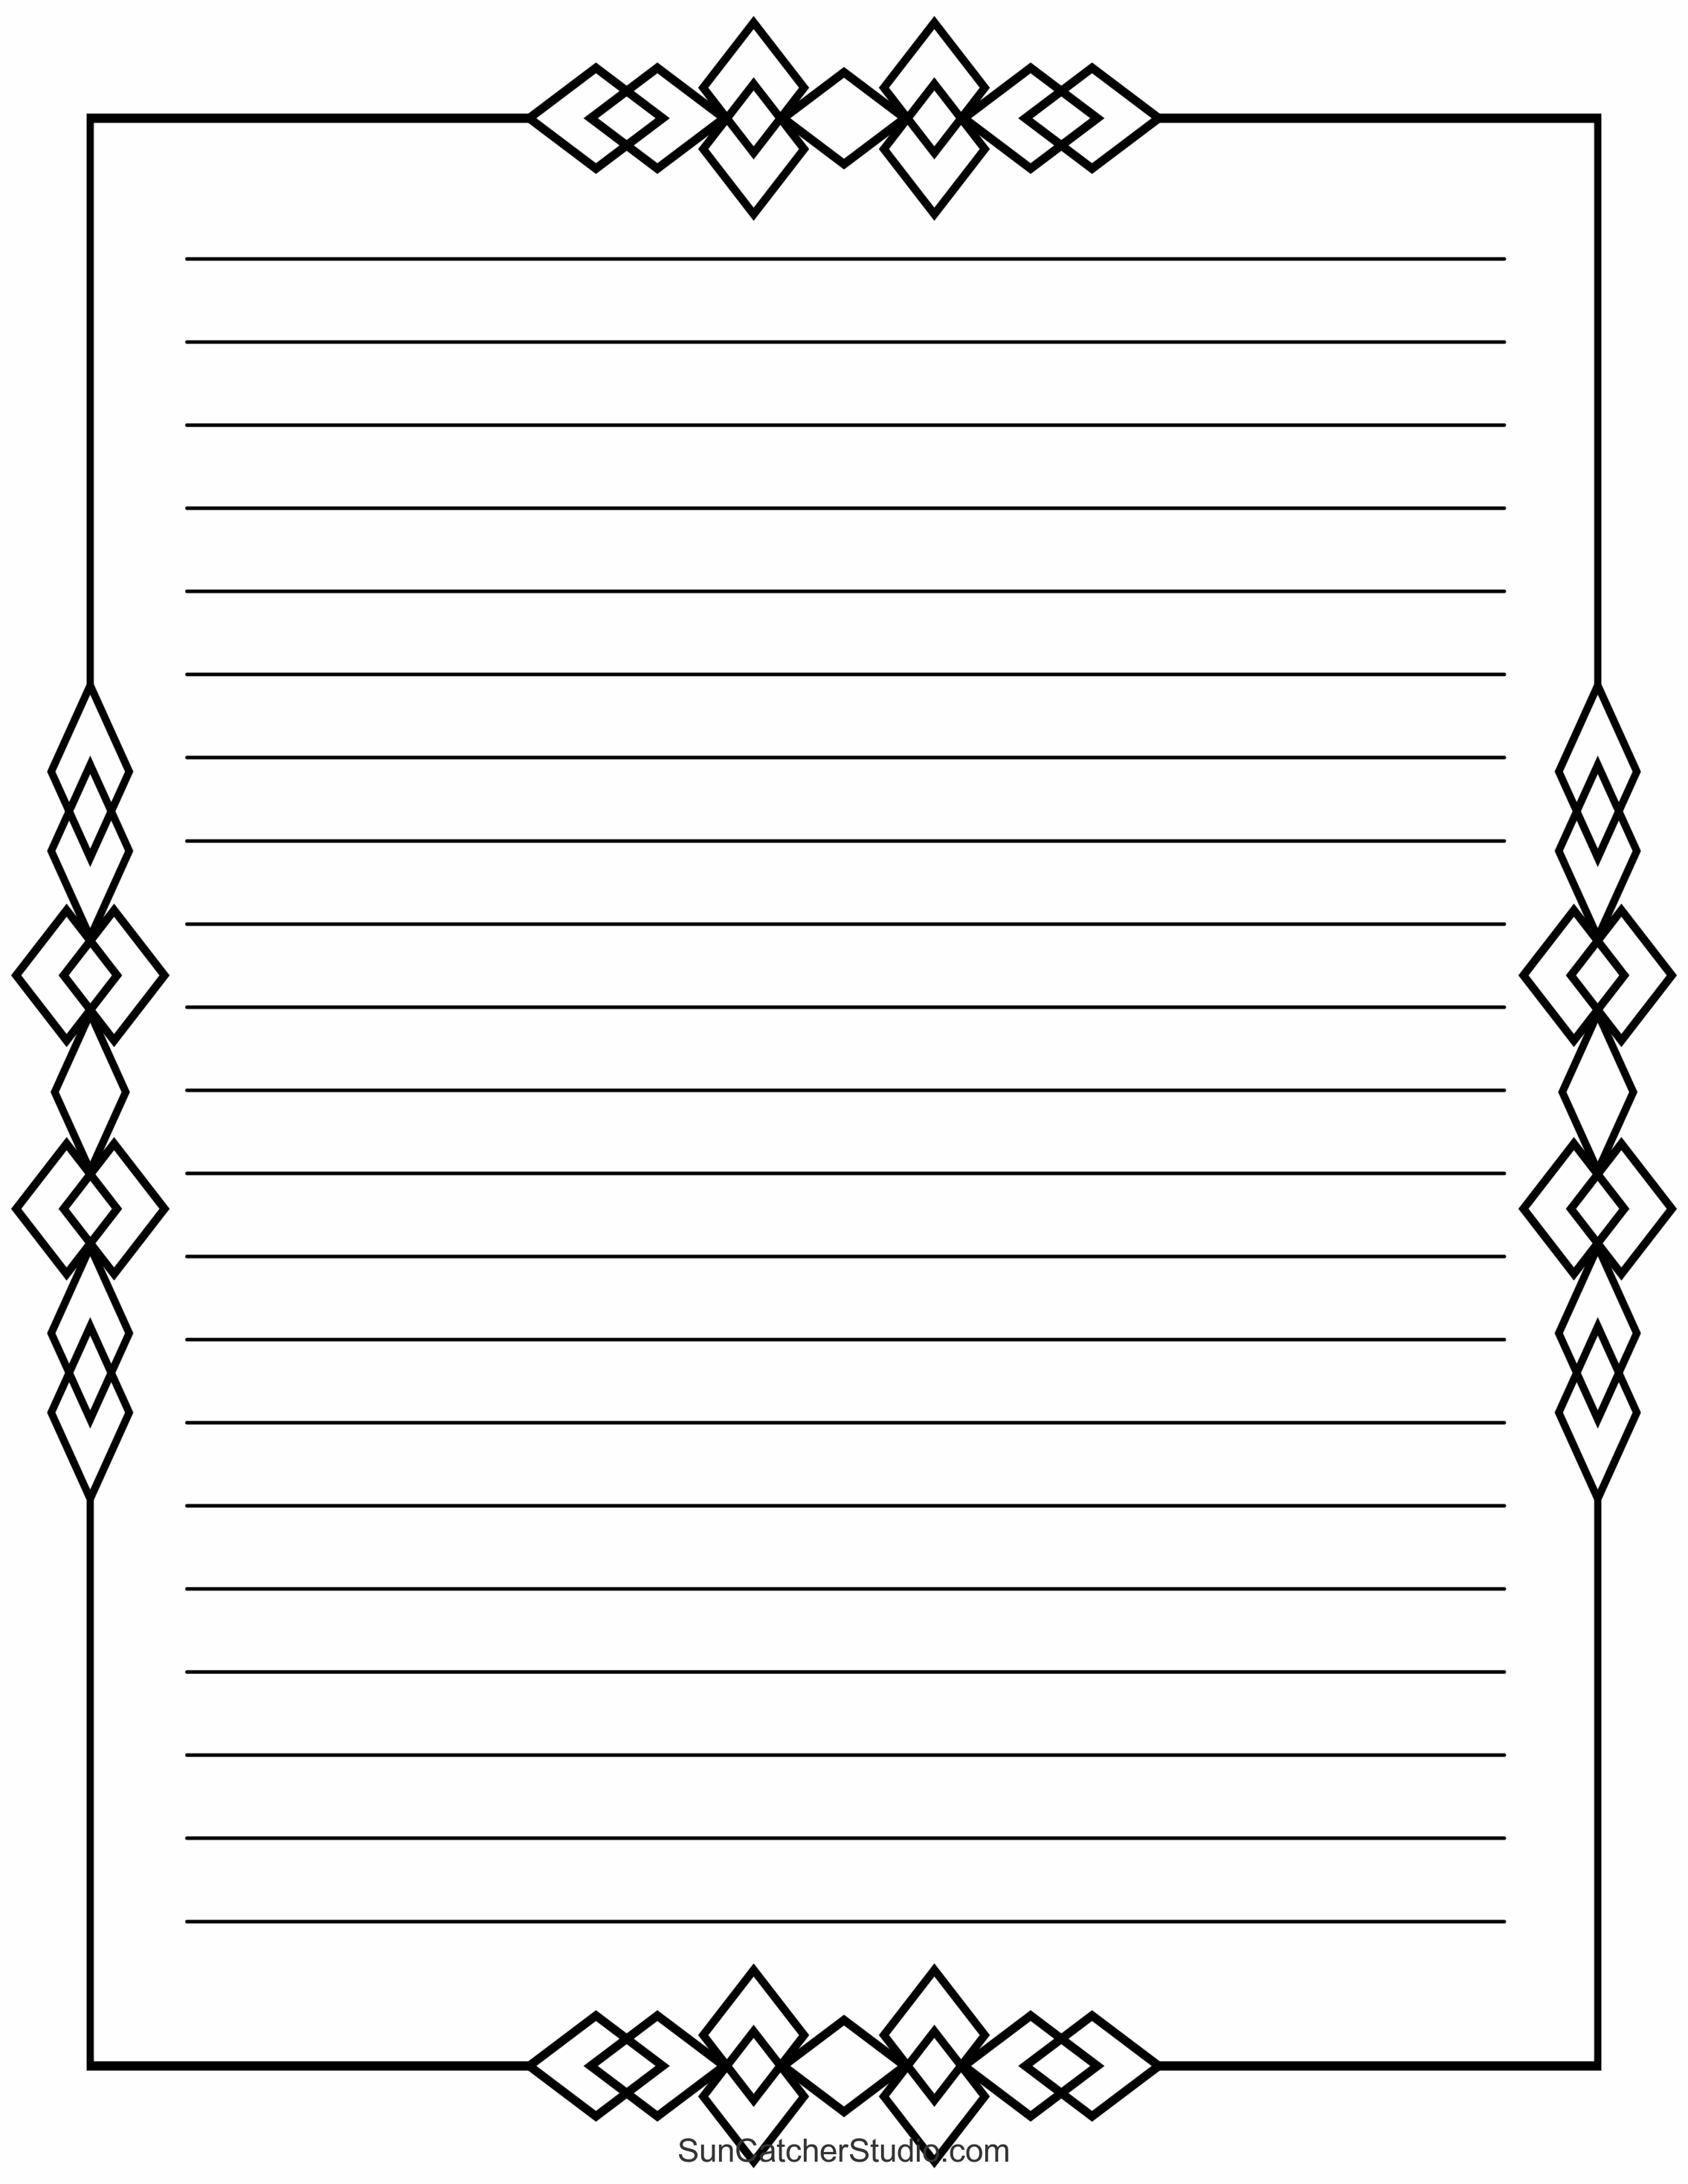 Free Printable Stationery And Lined Letter Writing Paper DIY Projects Patterns Monograms Designs Templates - Free Printable Border Paper